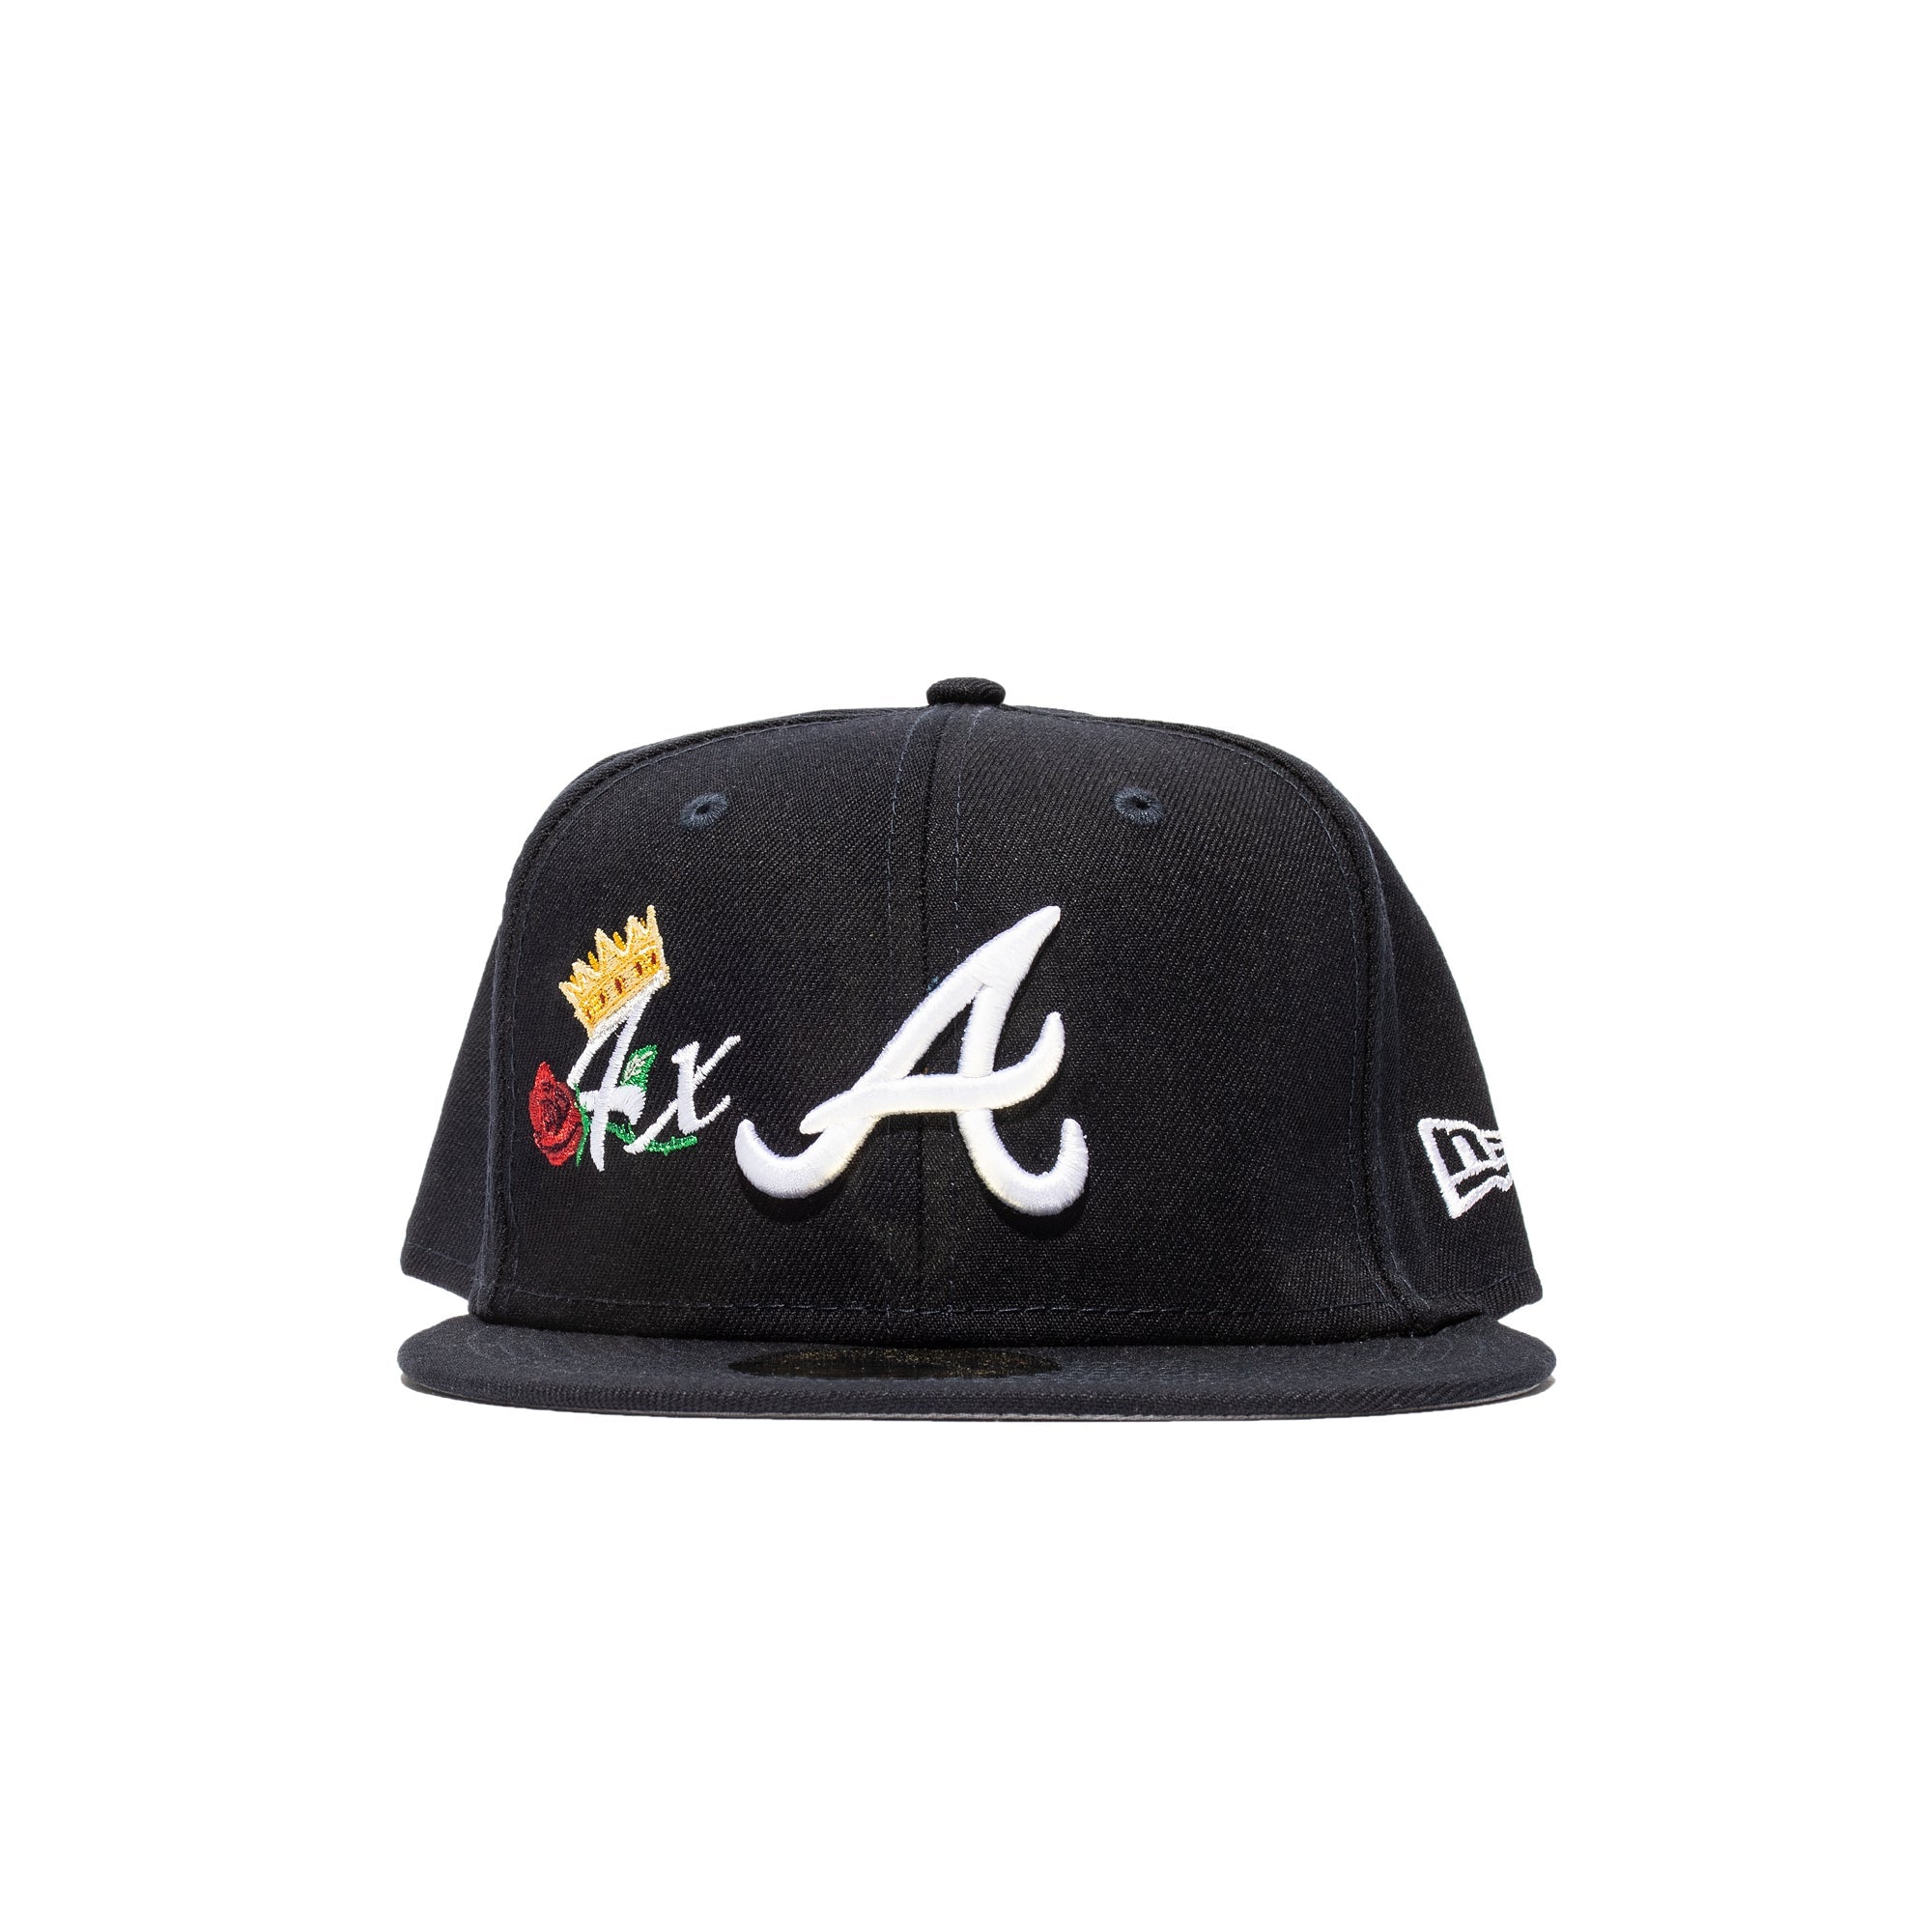 Atlanta Braves fitted hat